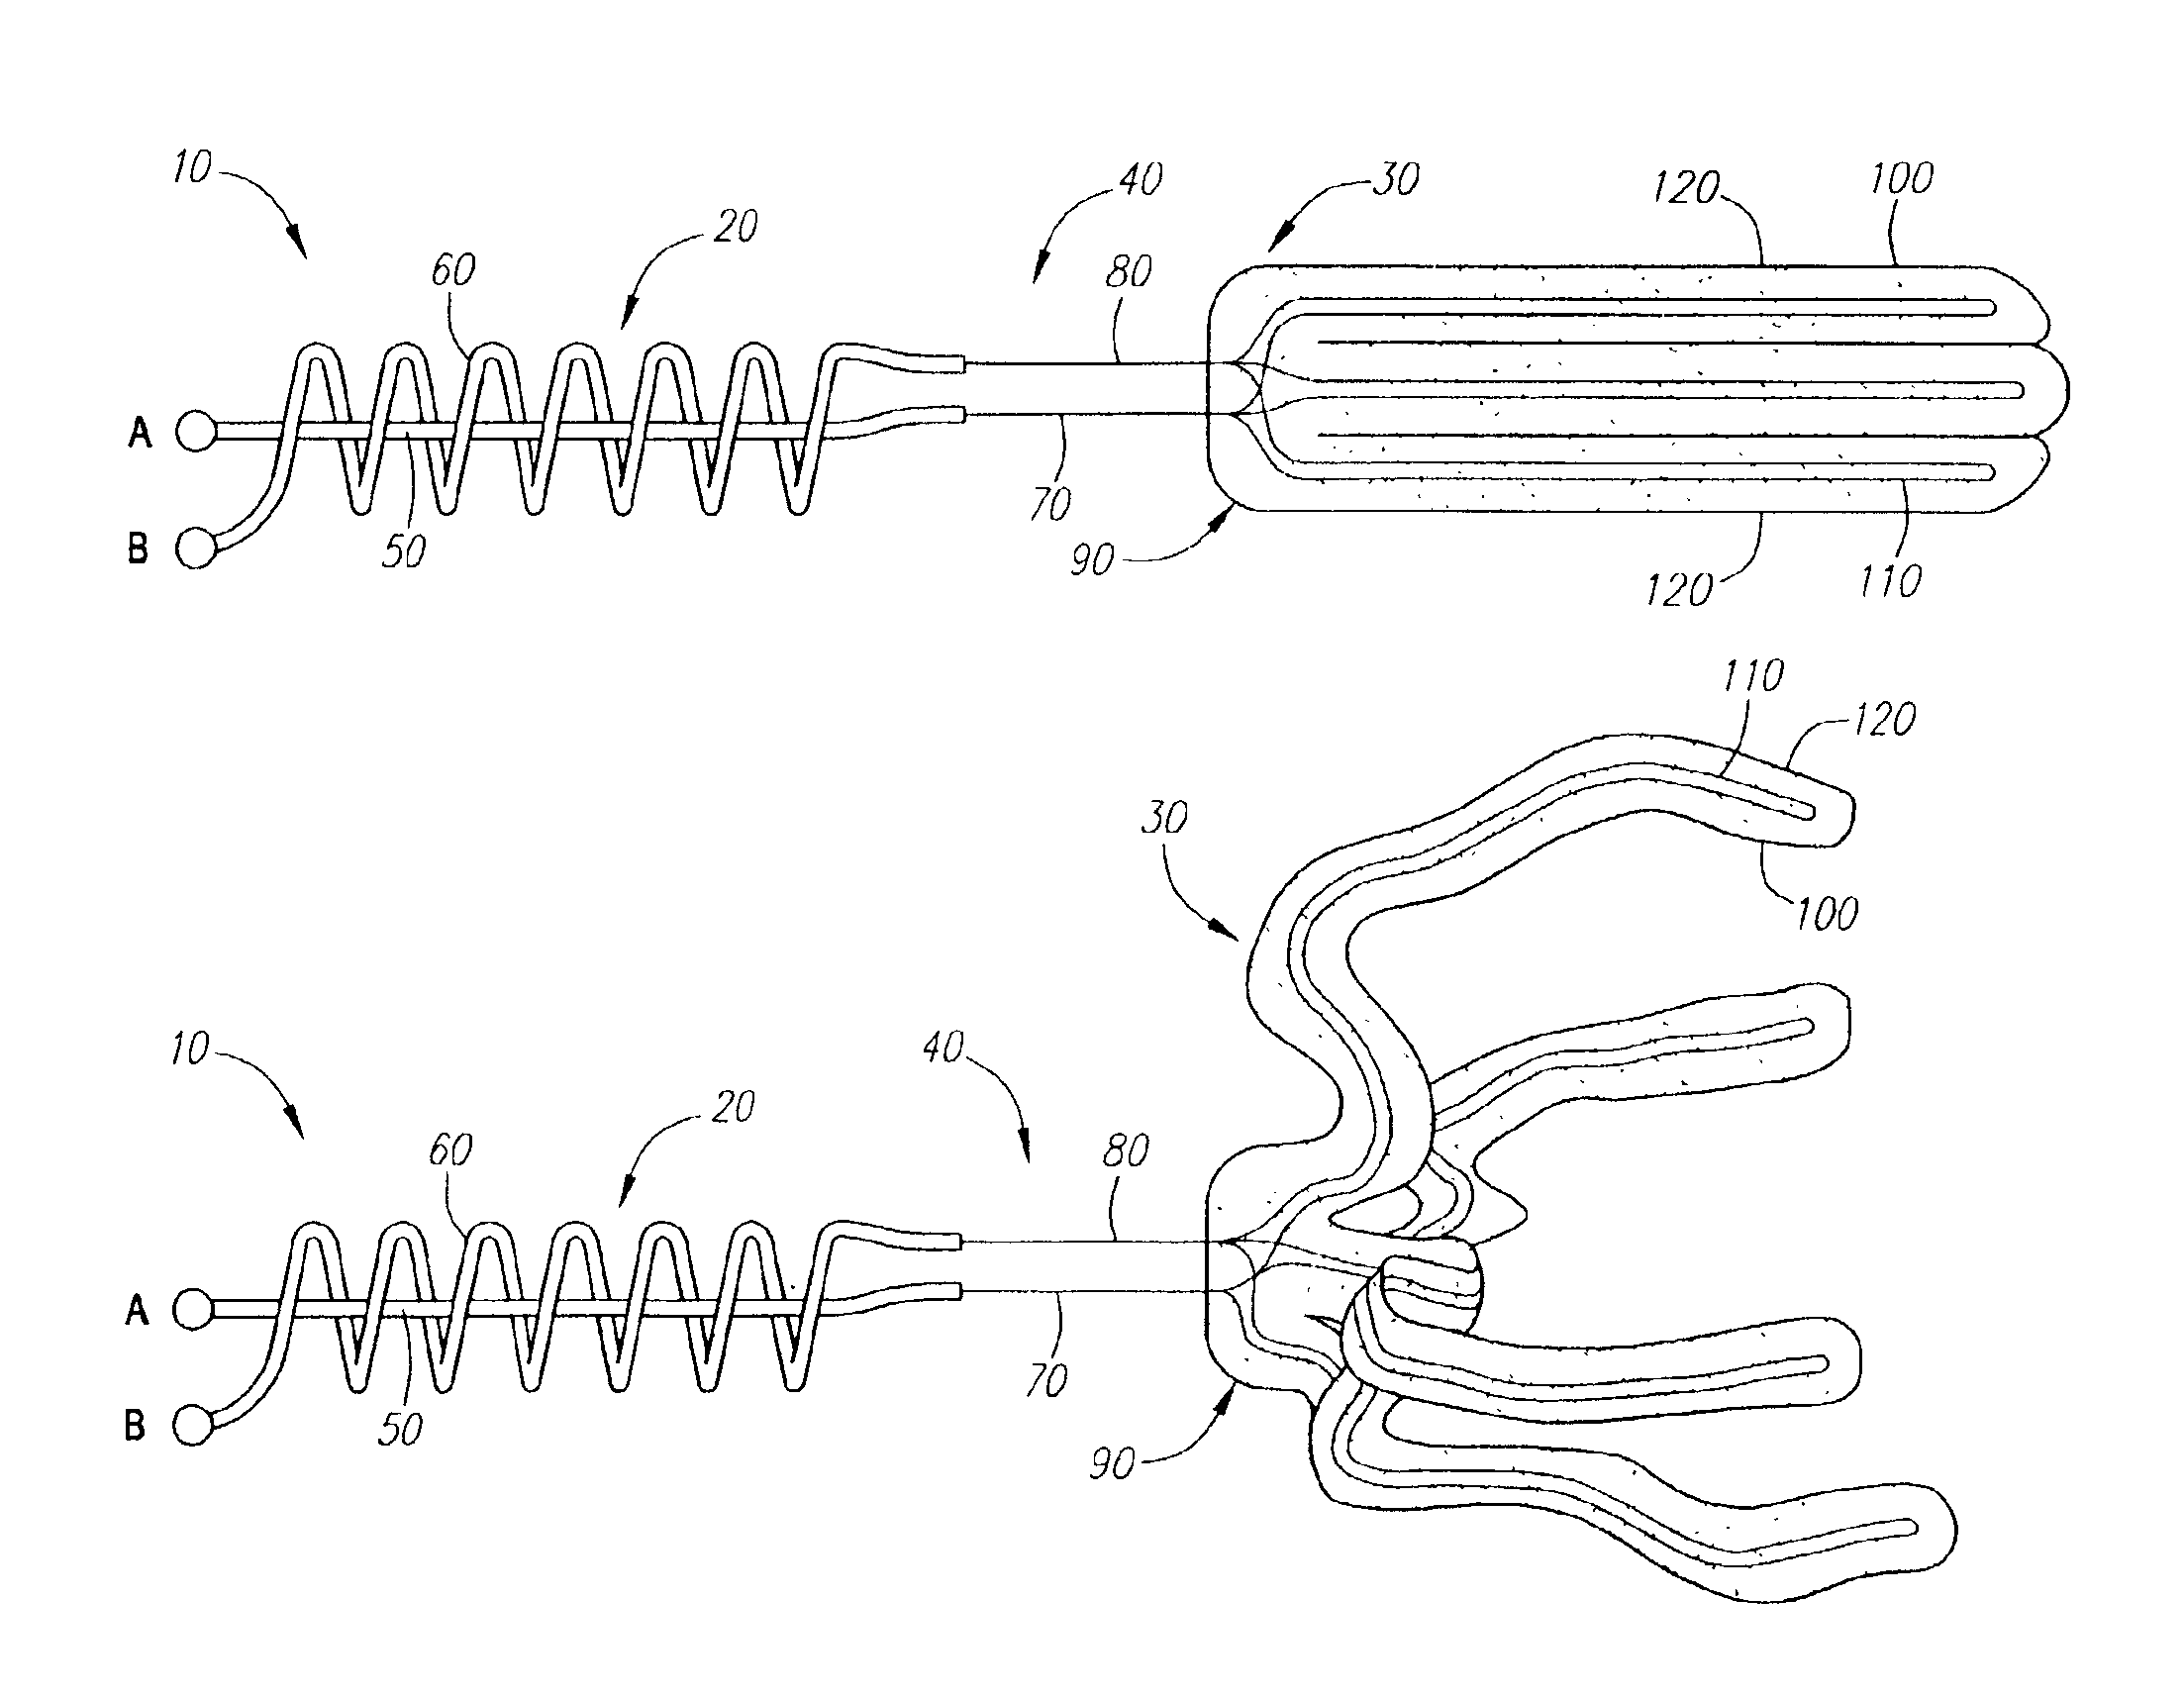 Detachable device with electrically responsive element